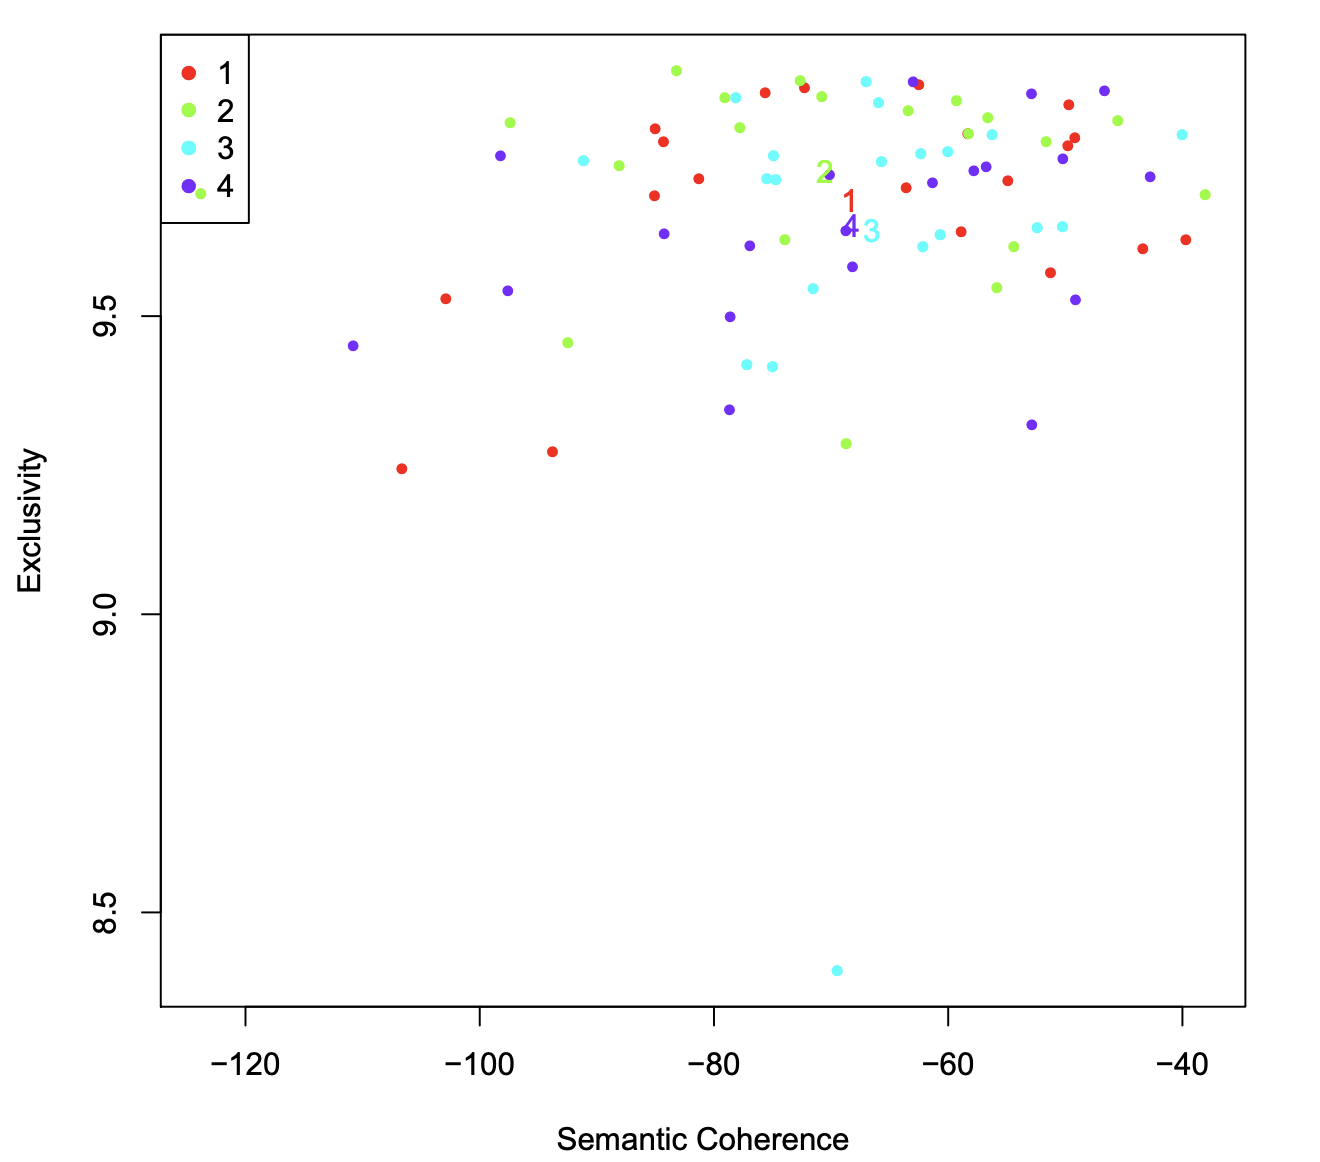 Figure 3: Plot of selectModel results. Numerals represent the average for each model, and dots represent topic specific scores